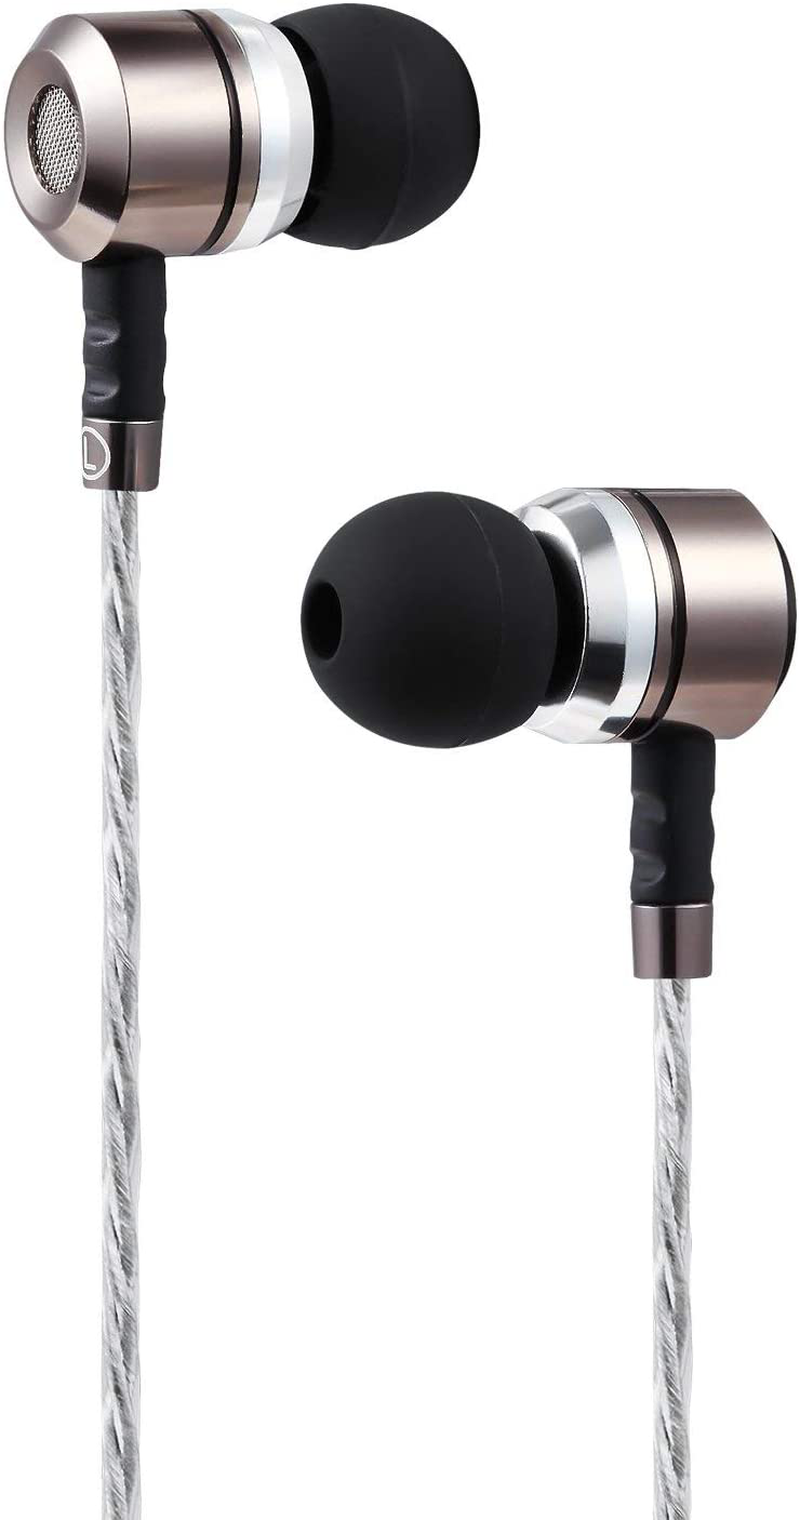 Sephia SP3060 Earbuds, Wired in-Ear Headphones with Tangle-Free Cord, Noise Isolating, Bass Driven Sound, Metal Earphones, Carry Case, Ear Bud Tips